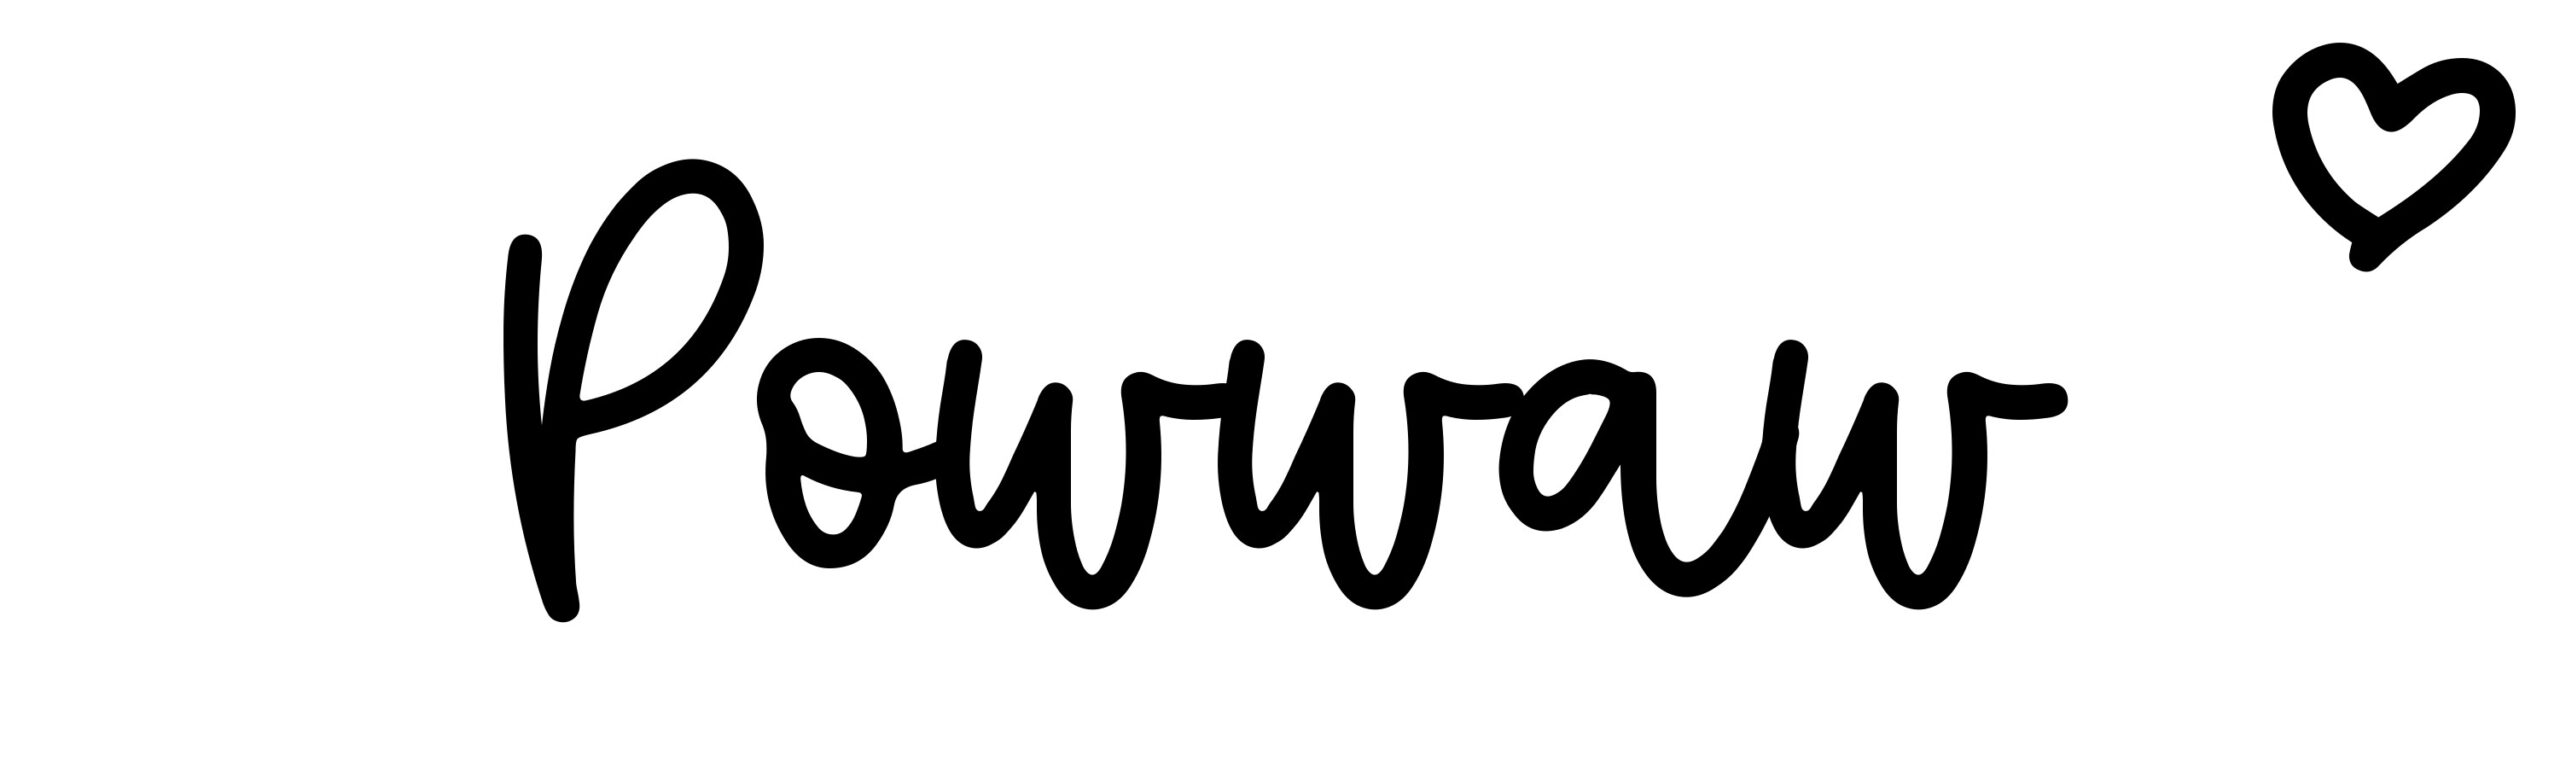 Powwaw - Name meaning, origin, variations and more